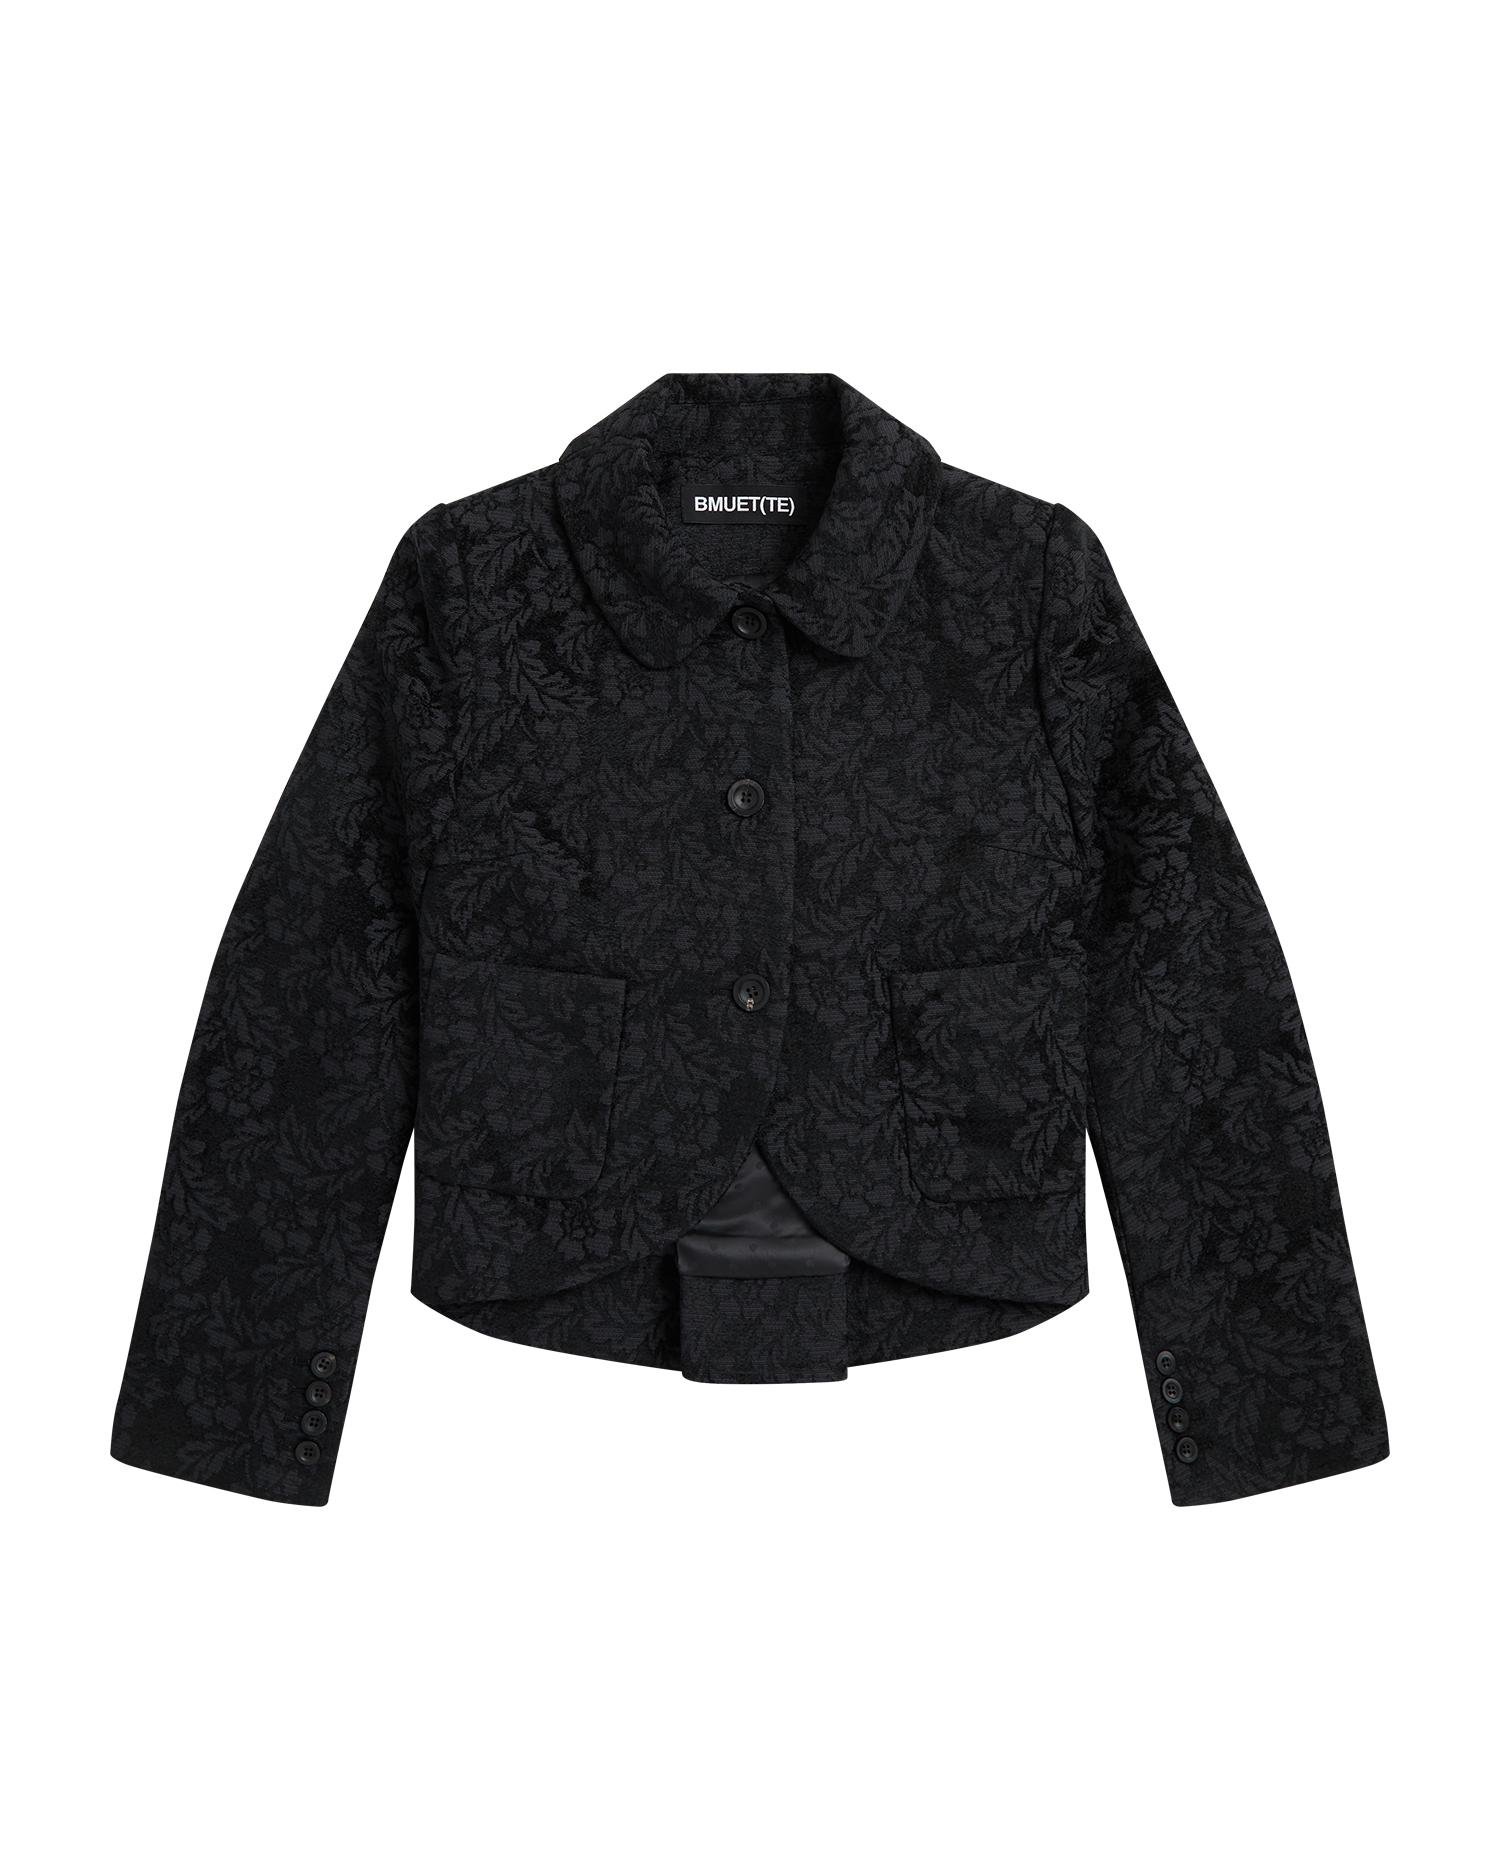 Buttoned jacket by BMUET(TE)